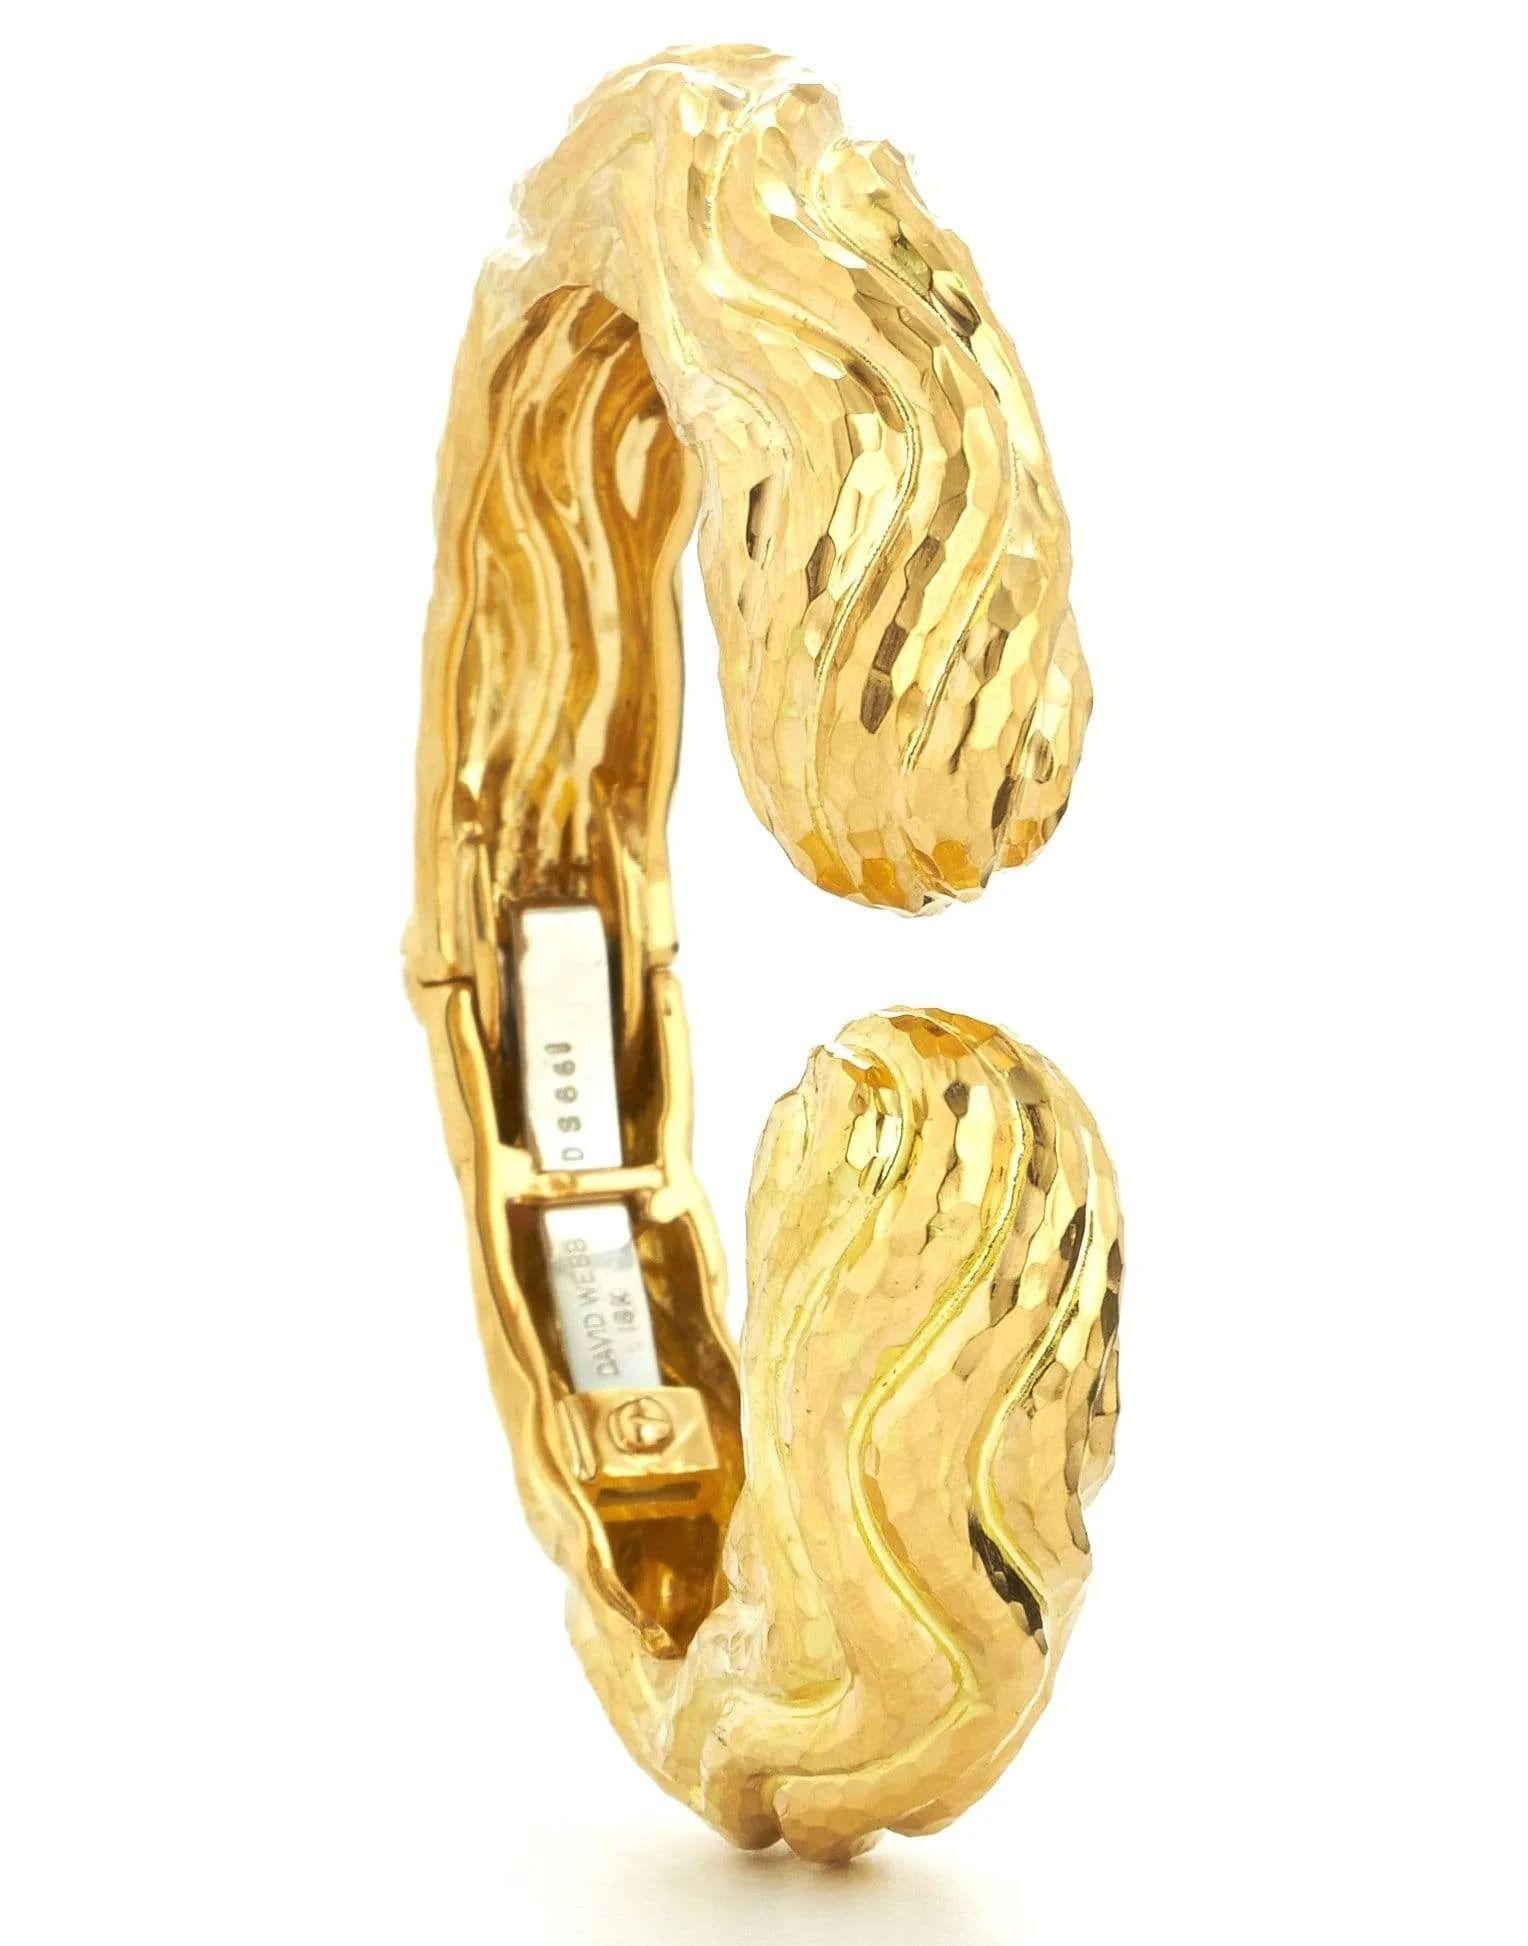 The David Webb Platinum & 18K Yellow Gold Hammered Cuff Wave Bangle Bracelet is a stunning piece of jewelry that showcases the brand's iconic style and exceptional craftsmanship. Crafted in 18K yellow gold, this cuff bracelet features a unique wave